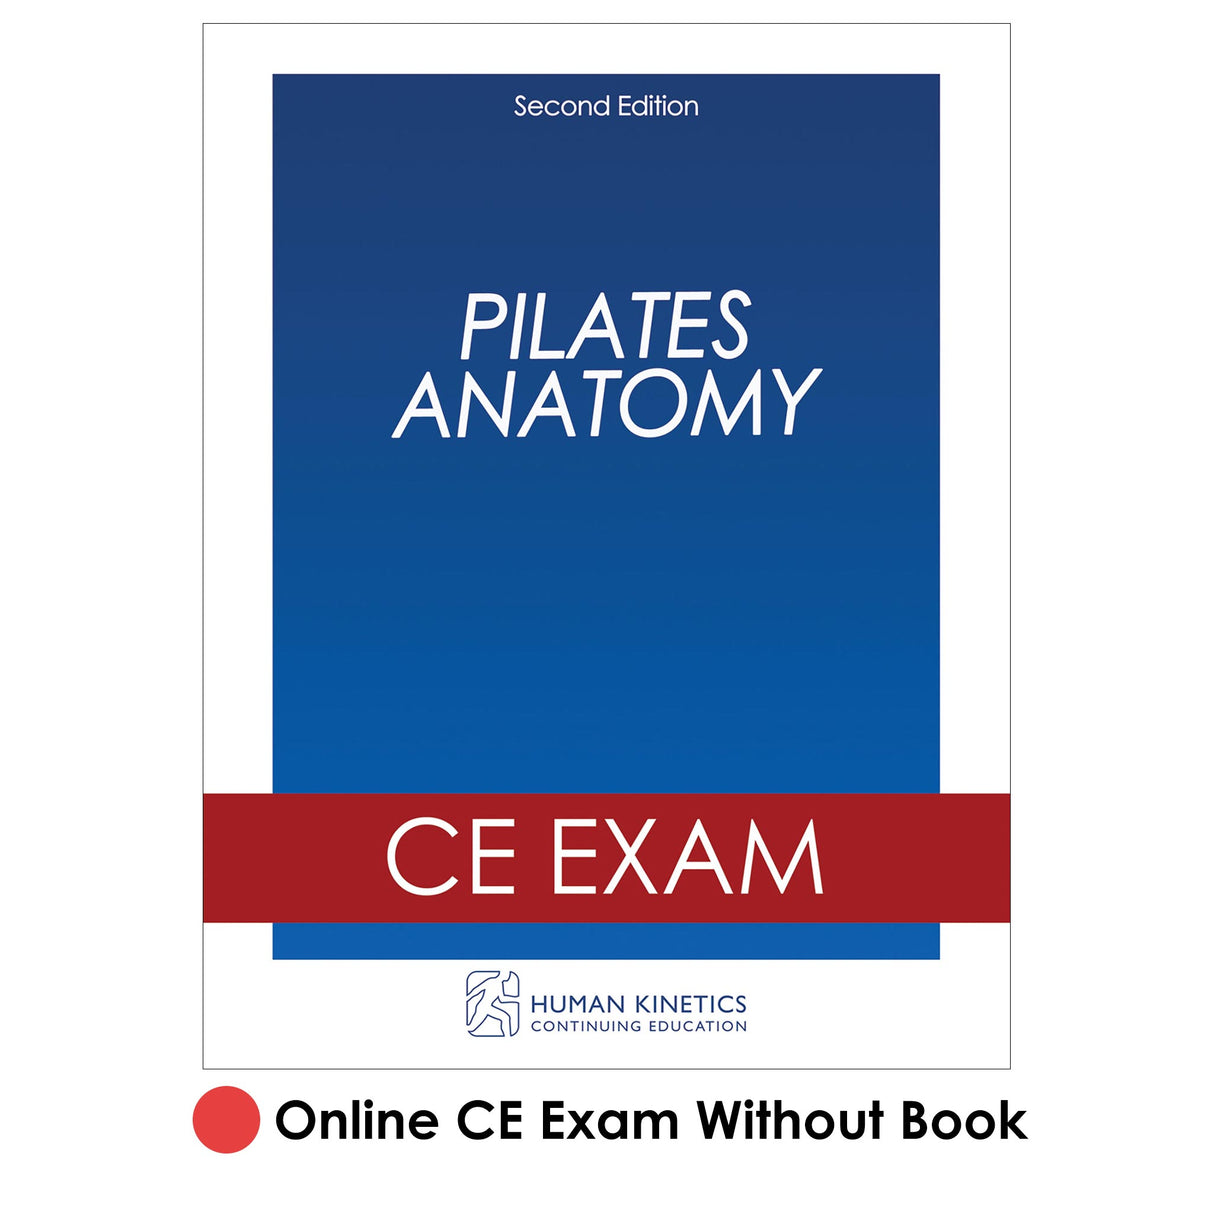 Pilates Anatomy 2nd Edition Online CE Exam Without Book